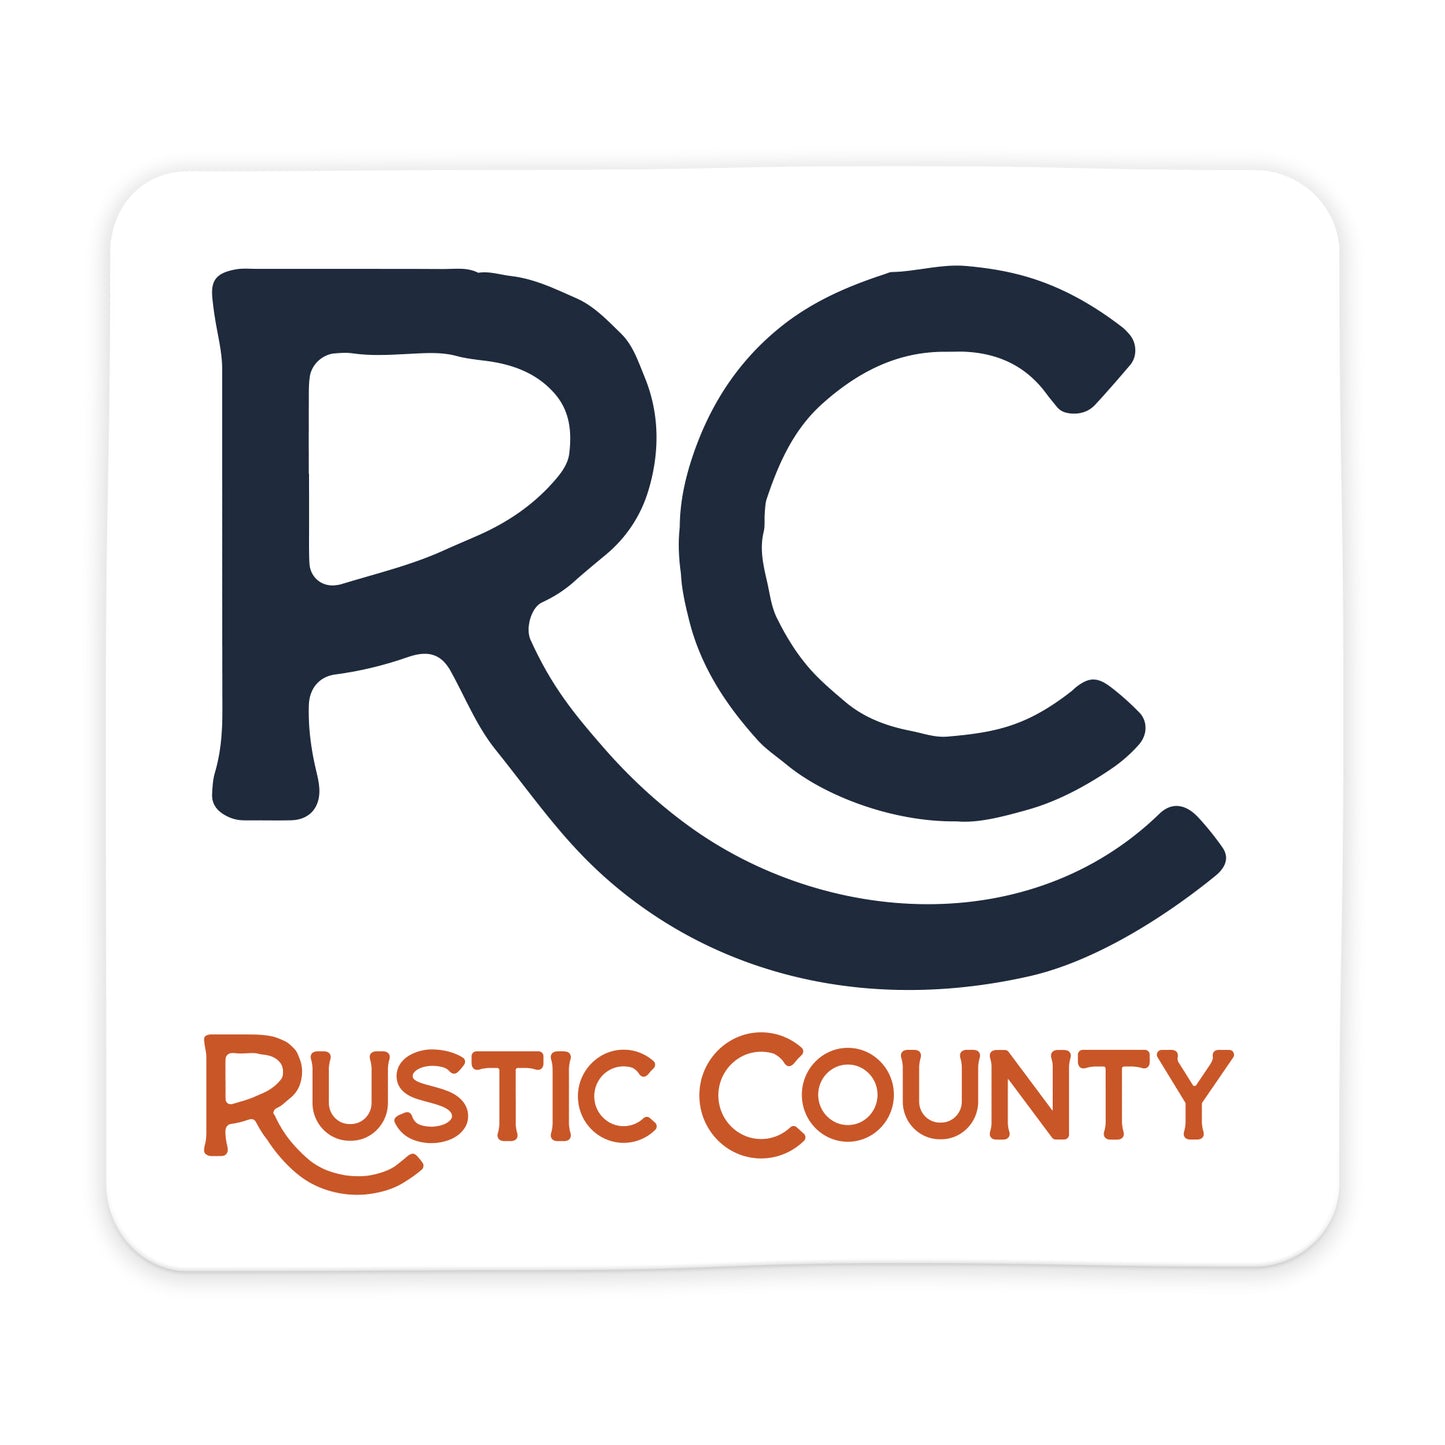 Rustic County Icon Sticker featuring the stylized initials "rc" in large navy blue letters, with the full name in smaller orange font below on a waterproof sticker.